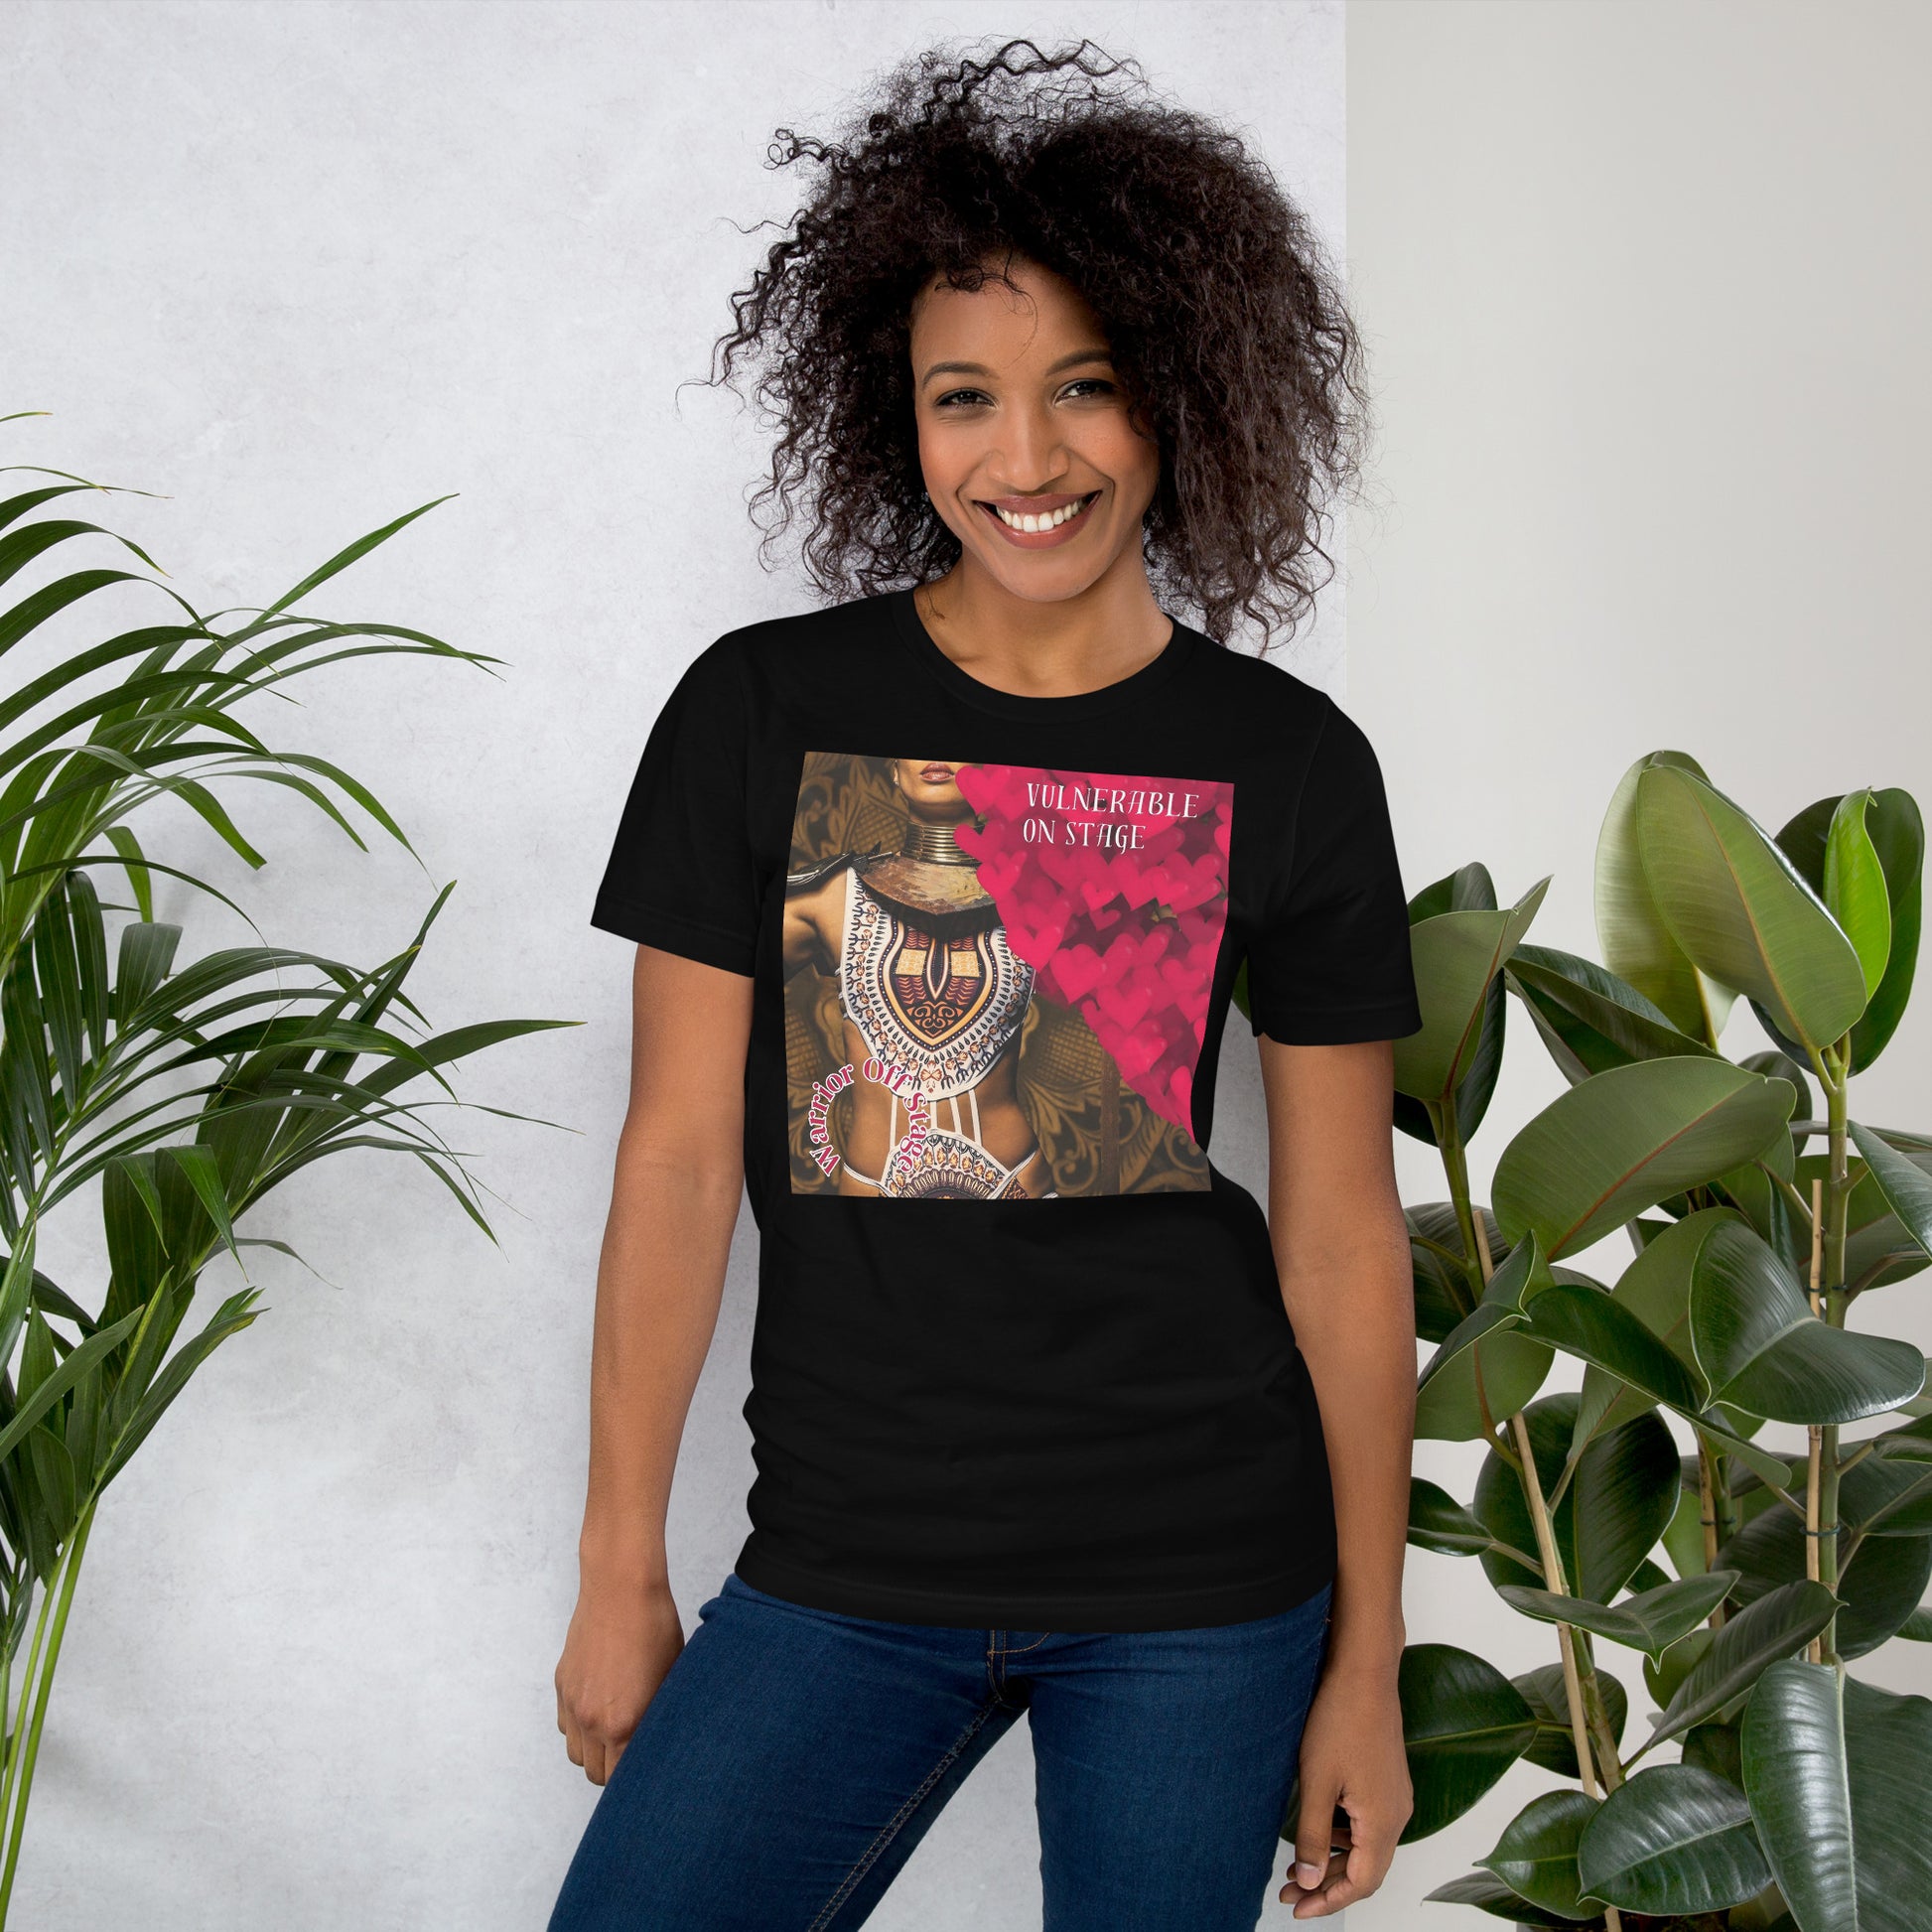 Unleash your vibe with the Unisex Artist Vulnerable Warrior T-Shirt - BFA1. This ain't just a tee; it's a power move for Black Female Artists (BFA). Rock authenticity on stage, warrior vibes off stage. Your style, your strength, your statement in the world of art and beyond.